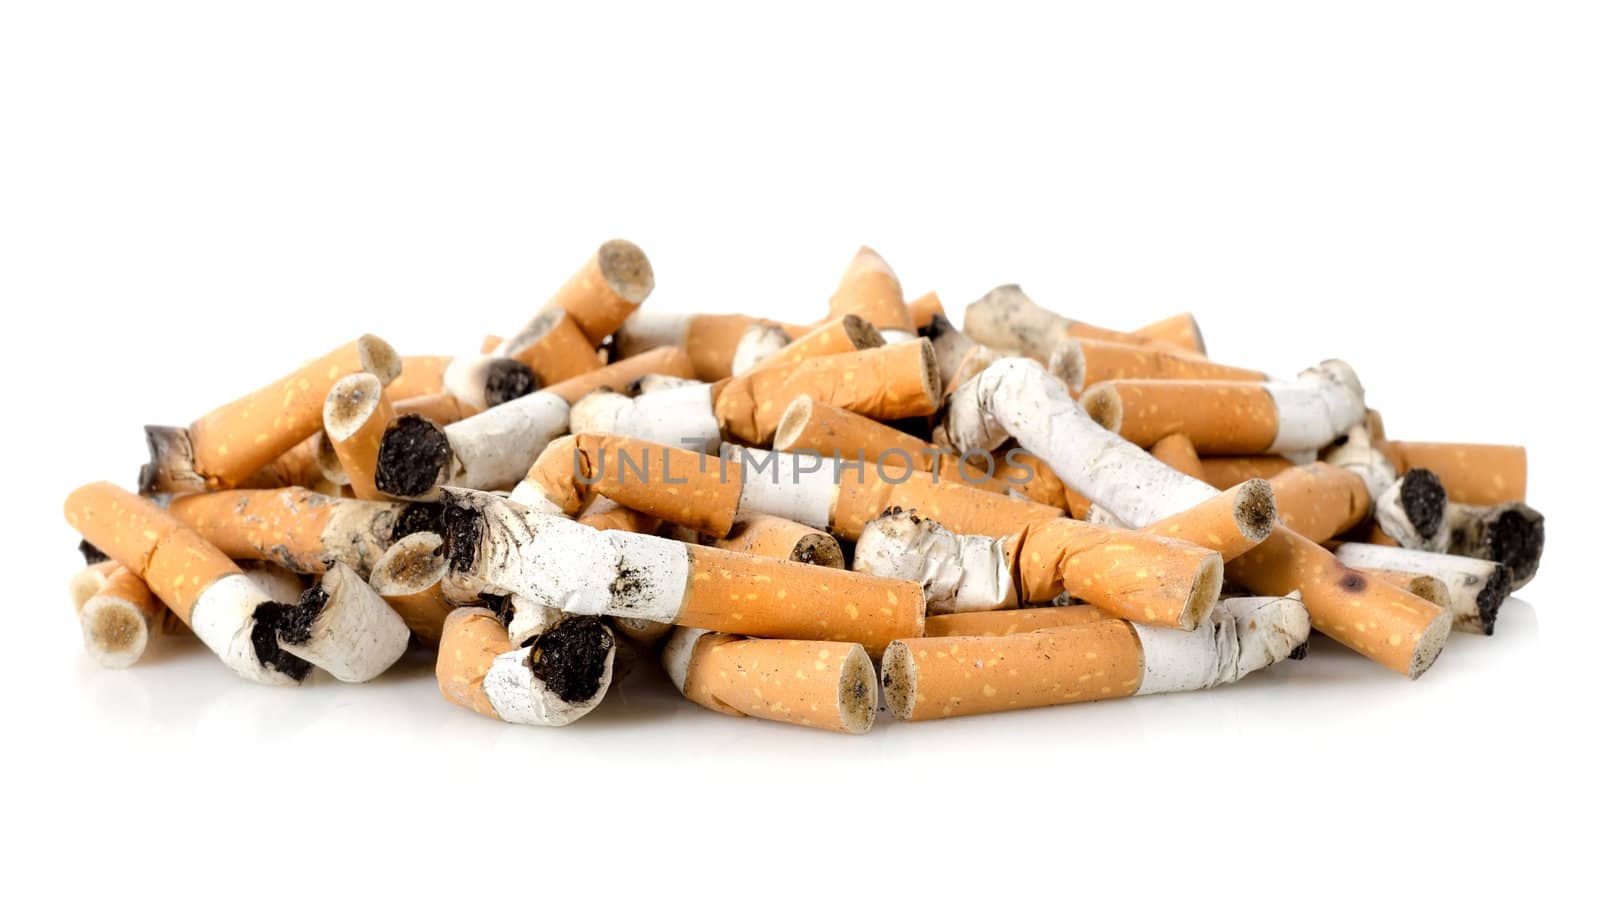 Cigarette butts by Givaga